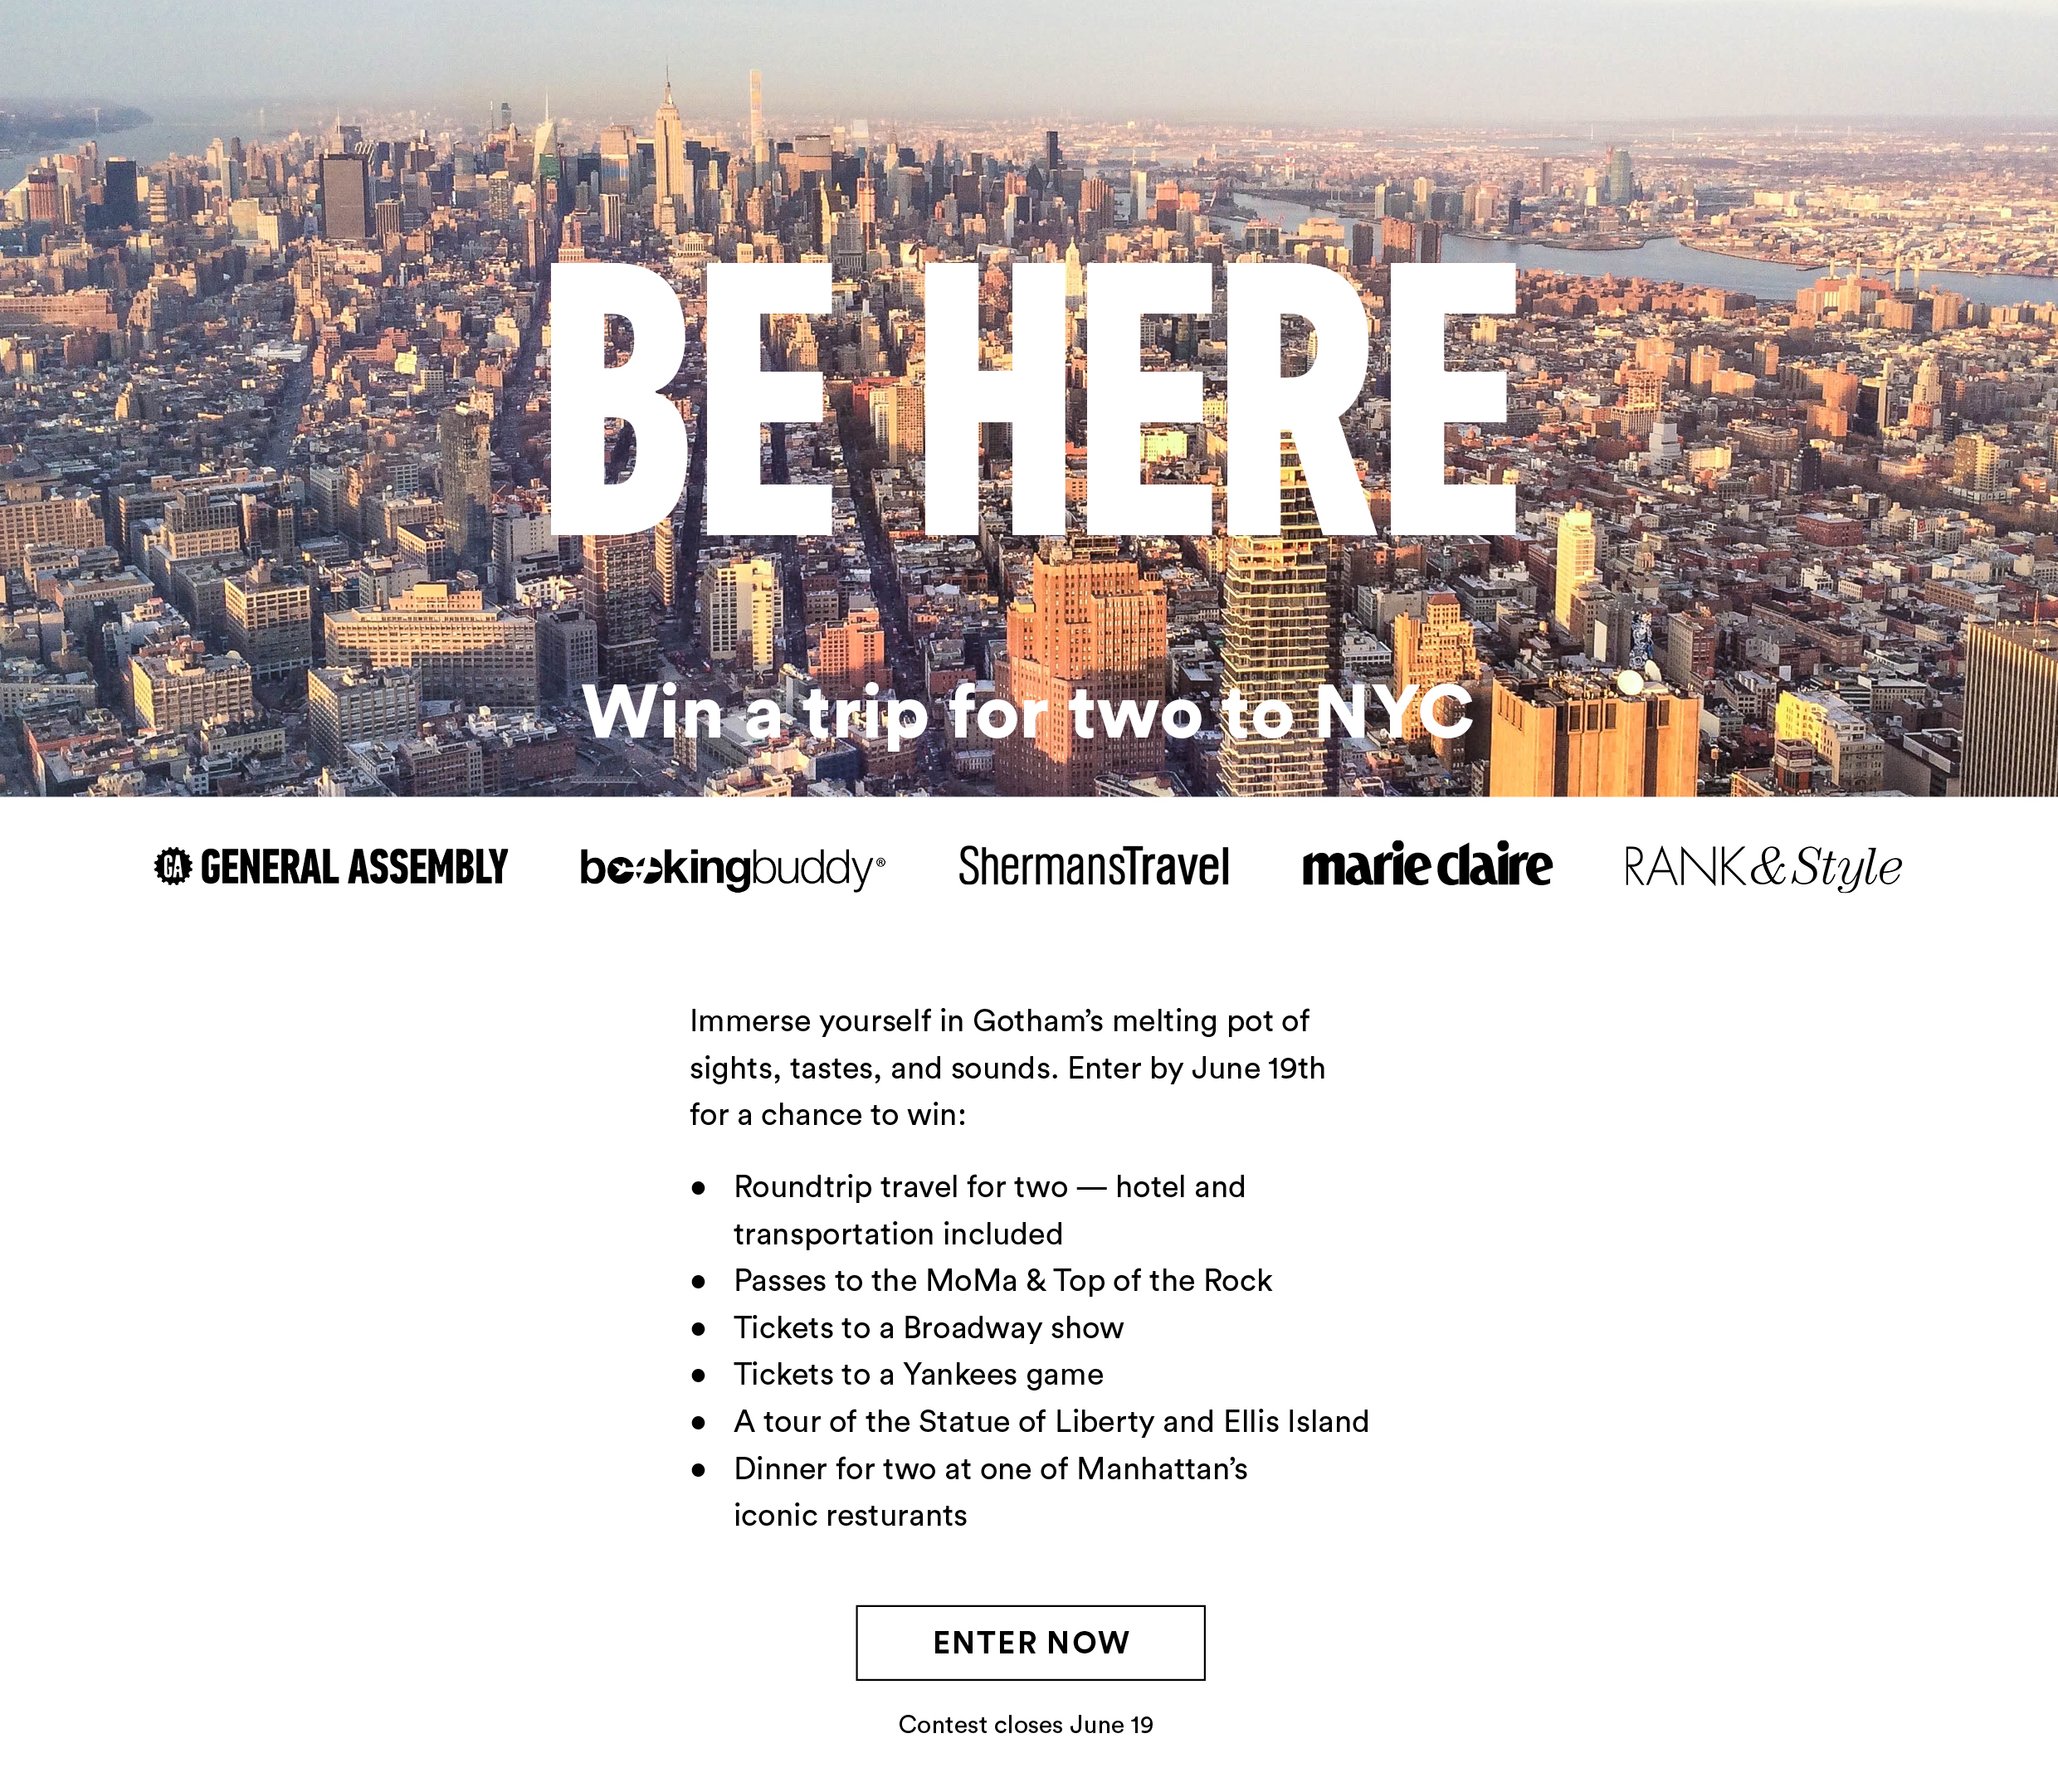 Win A Trip for 2 to NYC!